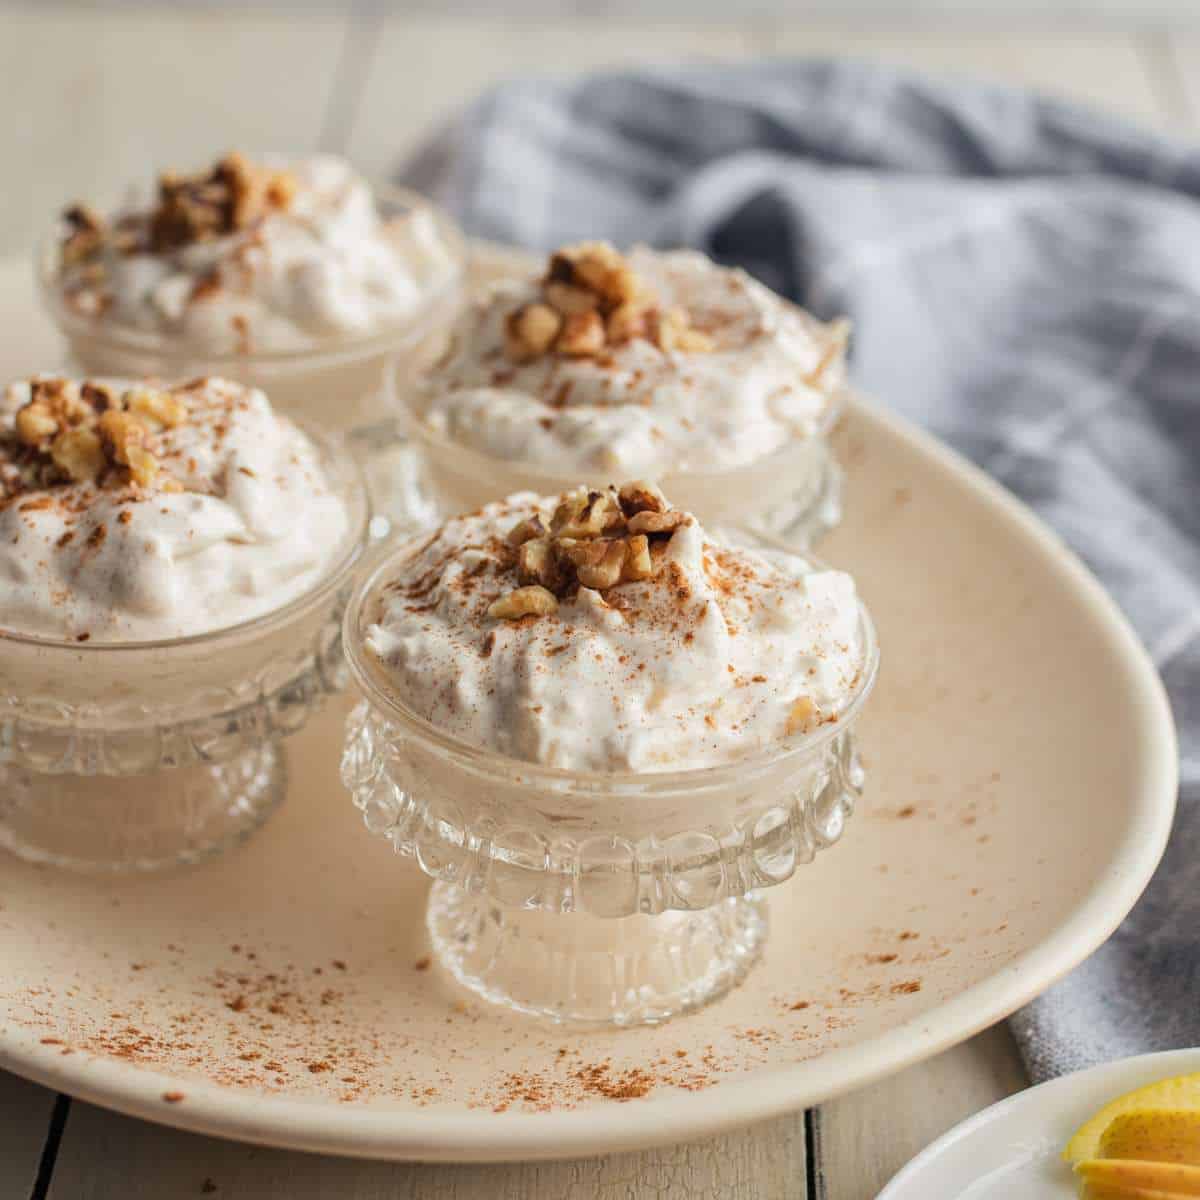 Four small dessert bowls of apple mousse on a plate garnished with cinnamon and chopped walnut.